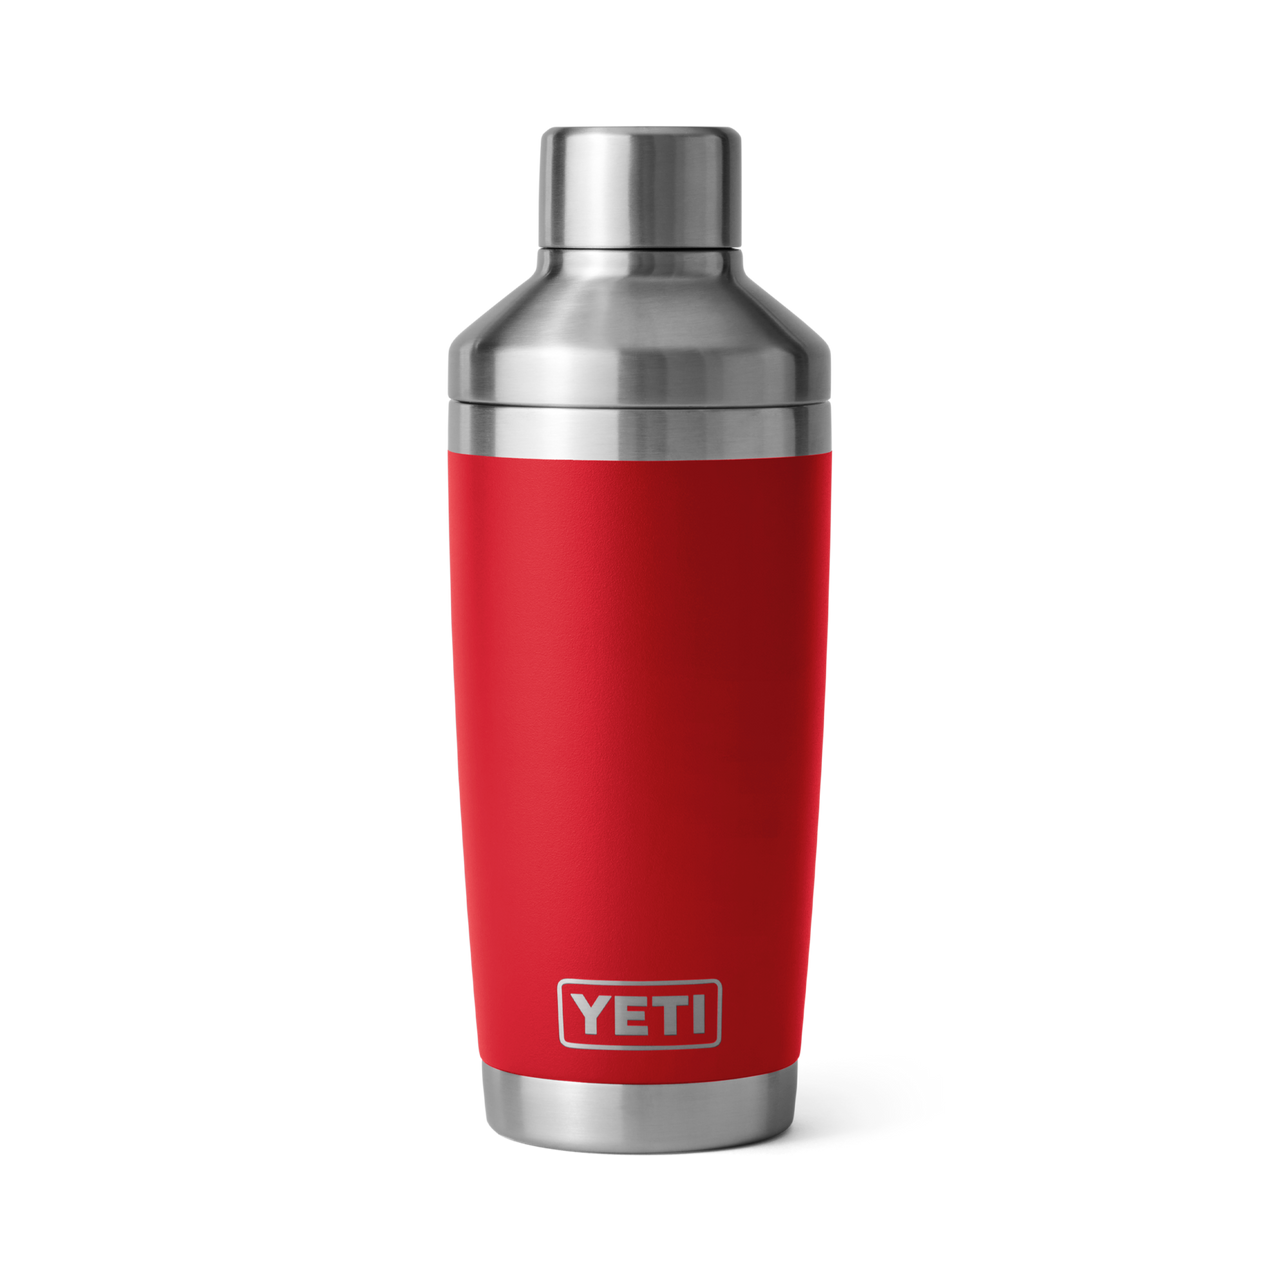 https://cdn11.bigcommerce.com/s-kk2jd0cxqh/images/stencil/1280x1280/products/18792/25265/yeti-yeti-rambler-20-oz-cocktail-shaker-rescue-red__80426.1697192285.png?c=1